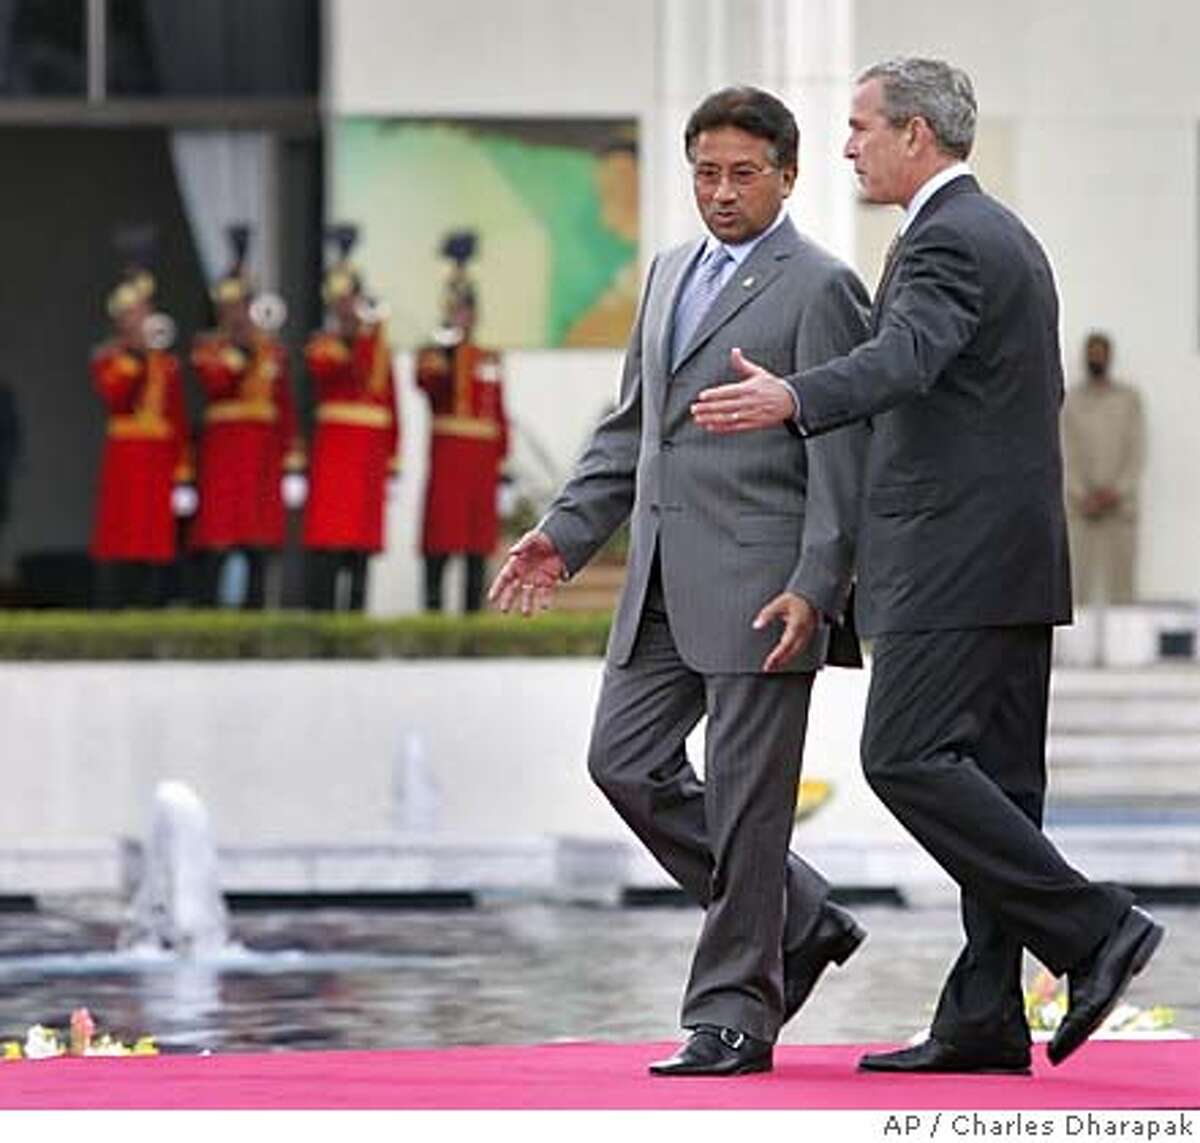 U.S. President George W. Bush, right, and Pakistani President Pervez Musharraf walk together to a joint press availability at Aiwan-e-Sadr, or "house of the President", in Islamabad, Pakistan, Saturday, March 4, 2006. President Bush showed solidarity Saturday with Pakistani President Gen. Perez Musharraf's war-on-terror alliance with the United States, a stance that is at odds with many in this Islamic nation. (AP Photo/Charles Dharapak)Ran on: 03-05-2006 President Bush and Pakistani President Pervez Musharraf walk to a joint news conference at the presidential palace in Islamabad.Ran on: 03-05-2006 President Bush and Pakistani President Pervez Musharraf walk to a joint news conference at the presidential palace in Islamabad.